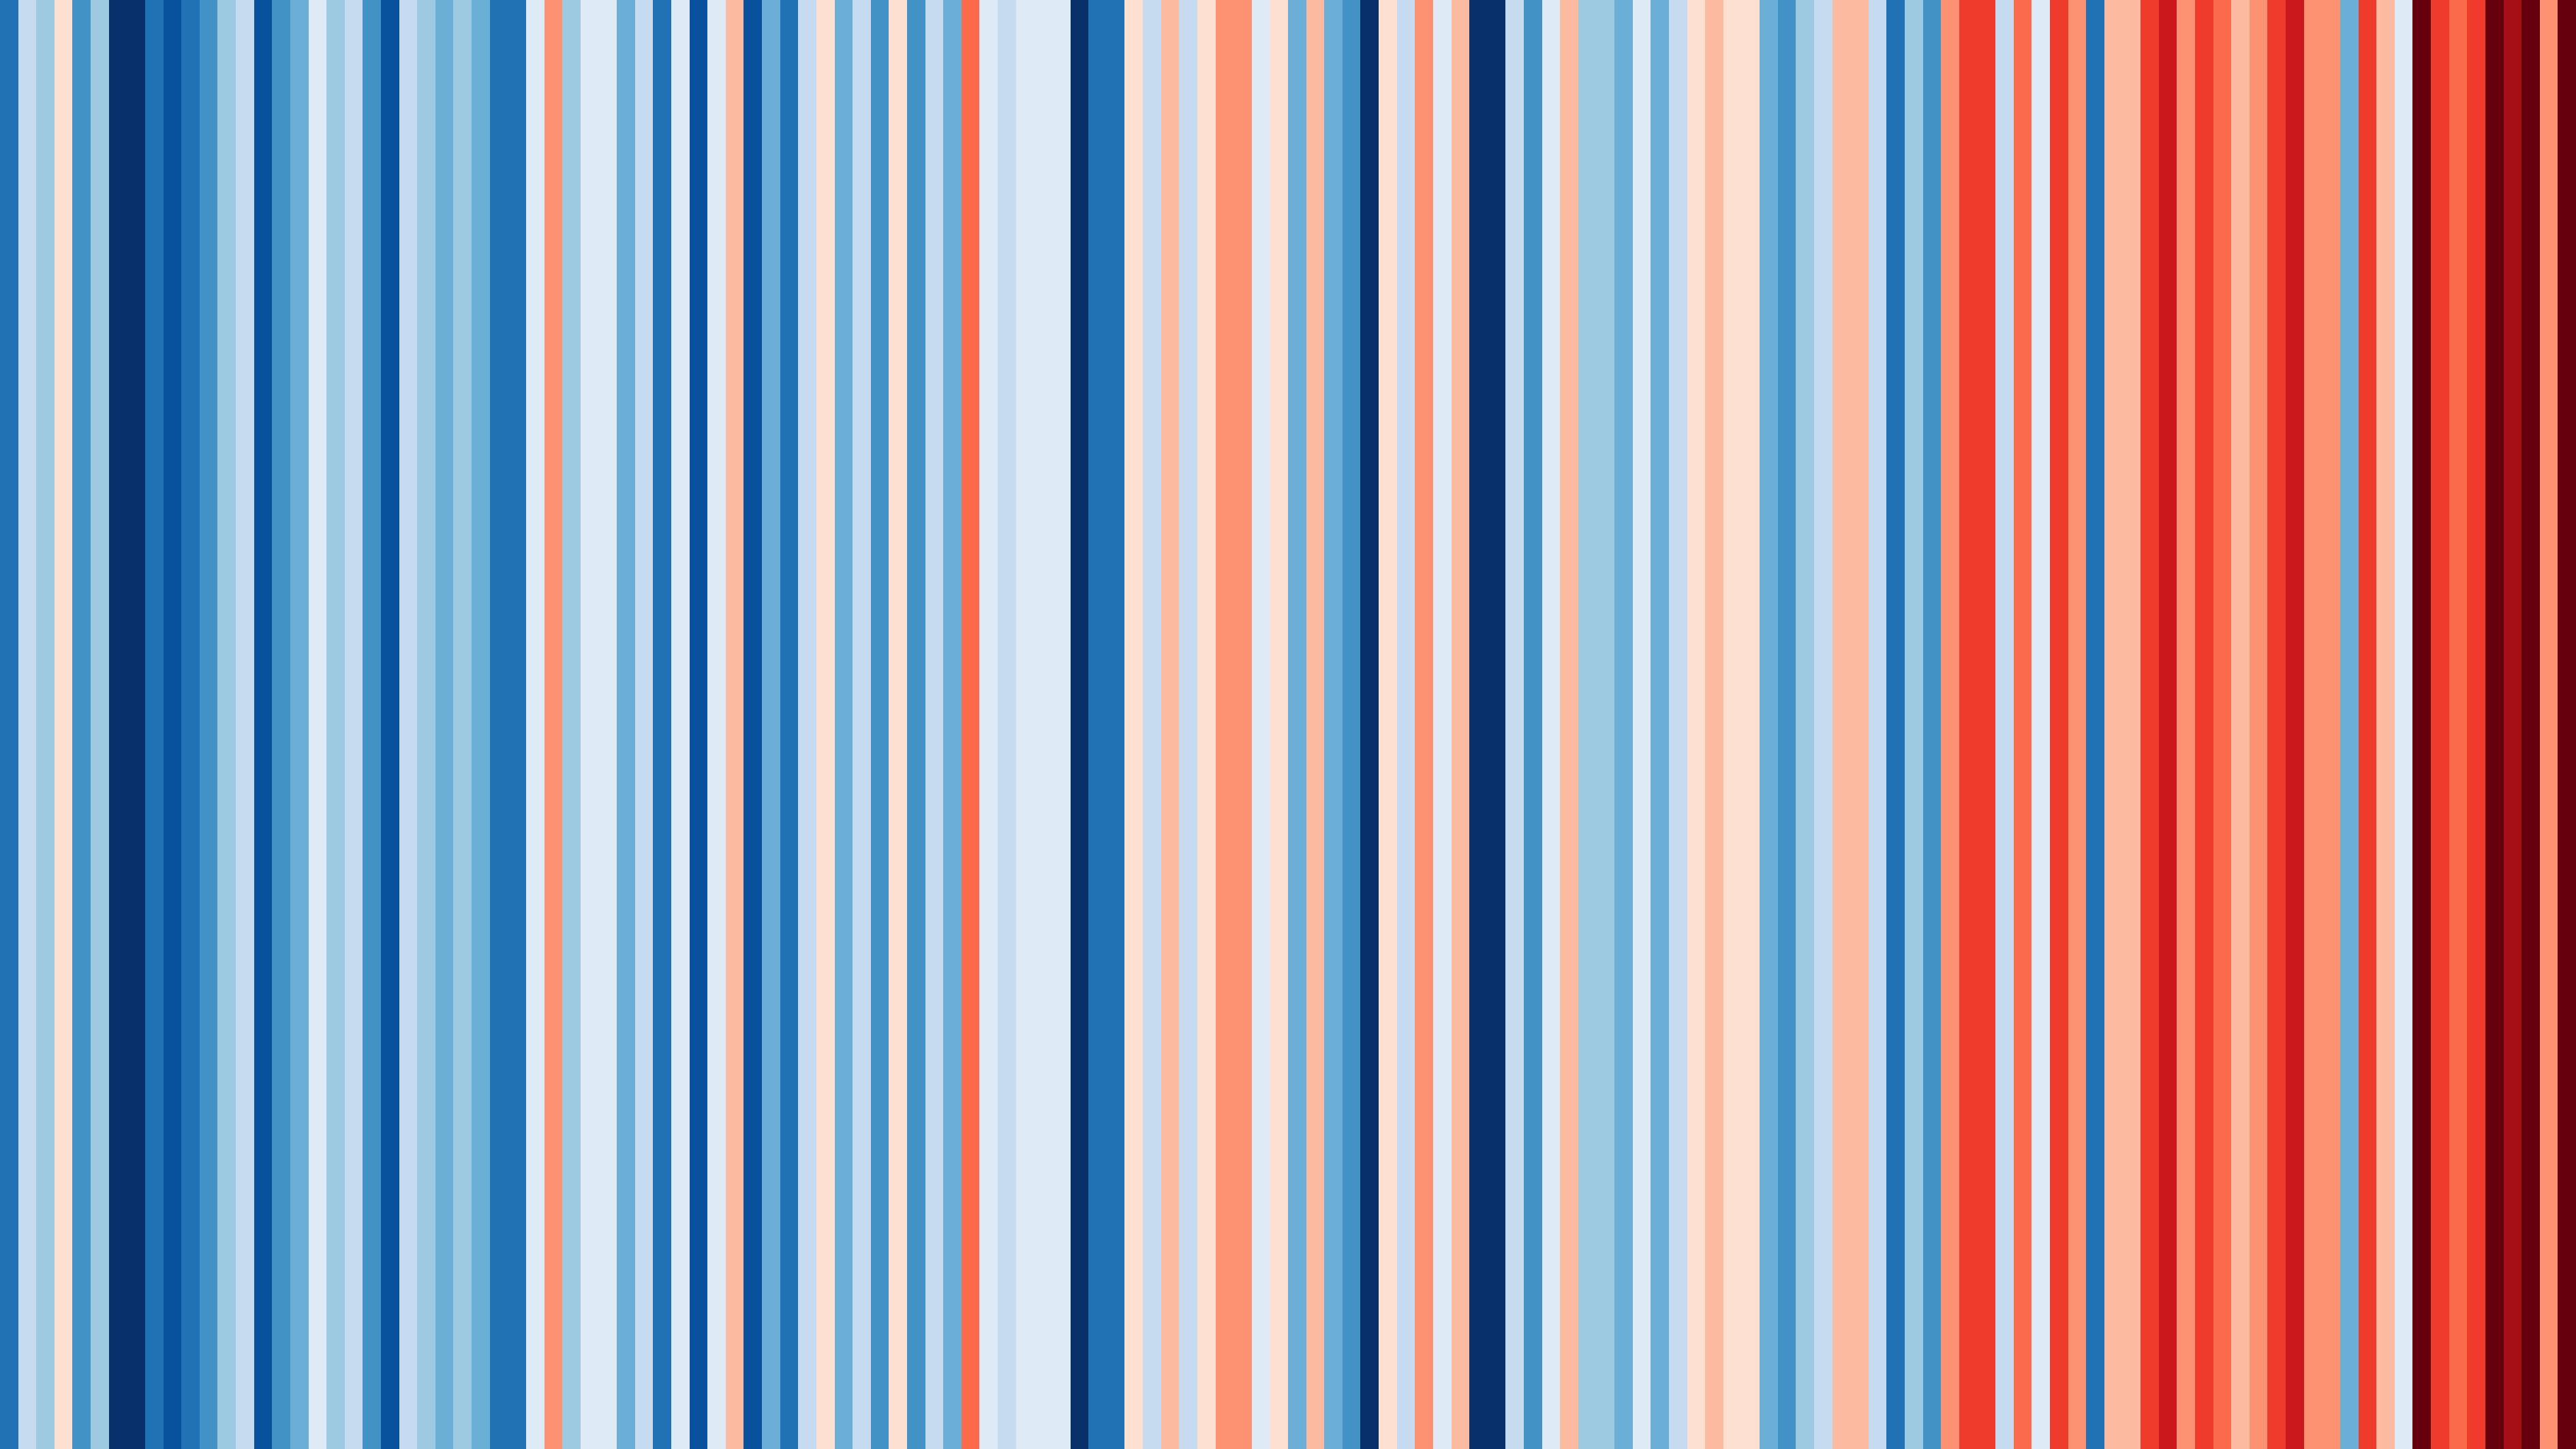 A series of blue and red stripes, getting more and more red towards the right.